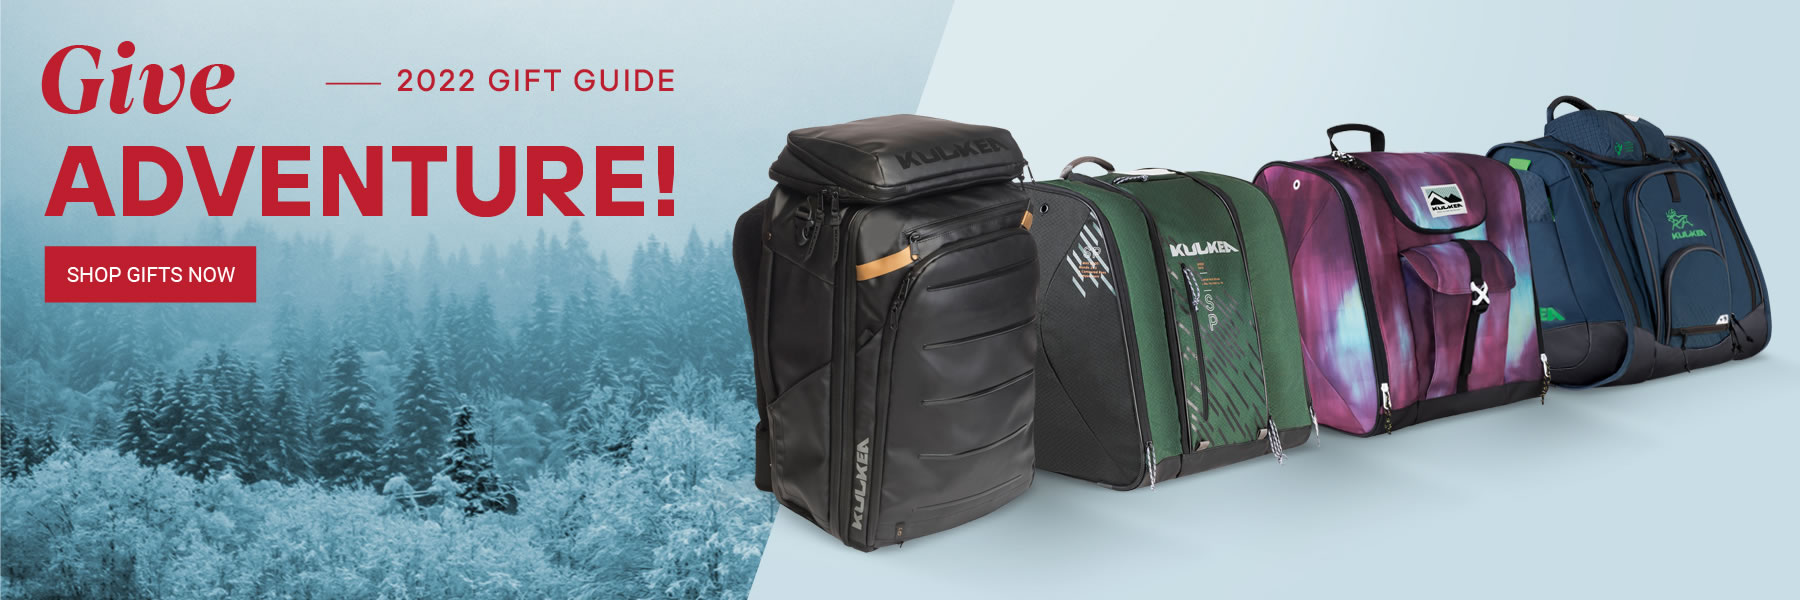 Give Adventure 2022 Gift Guide - Shop Now